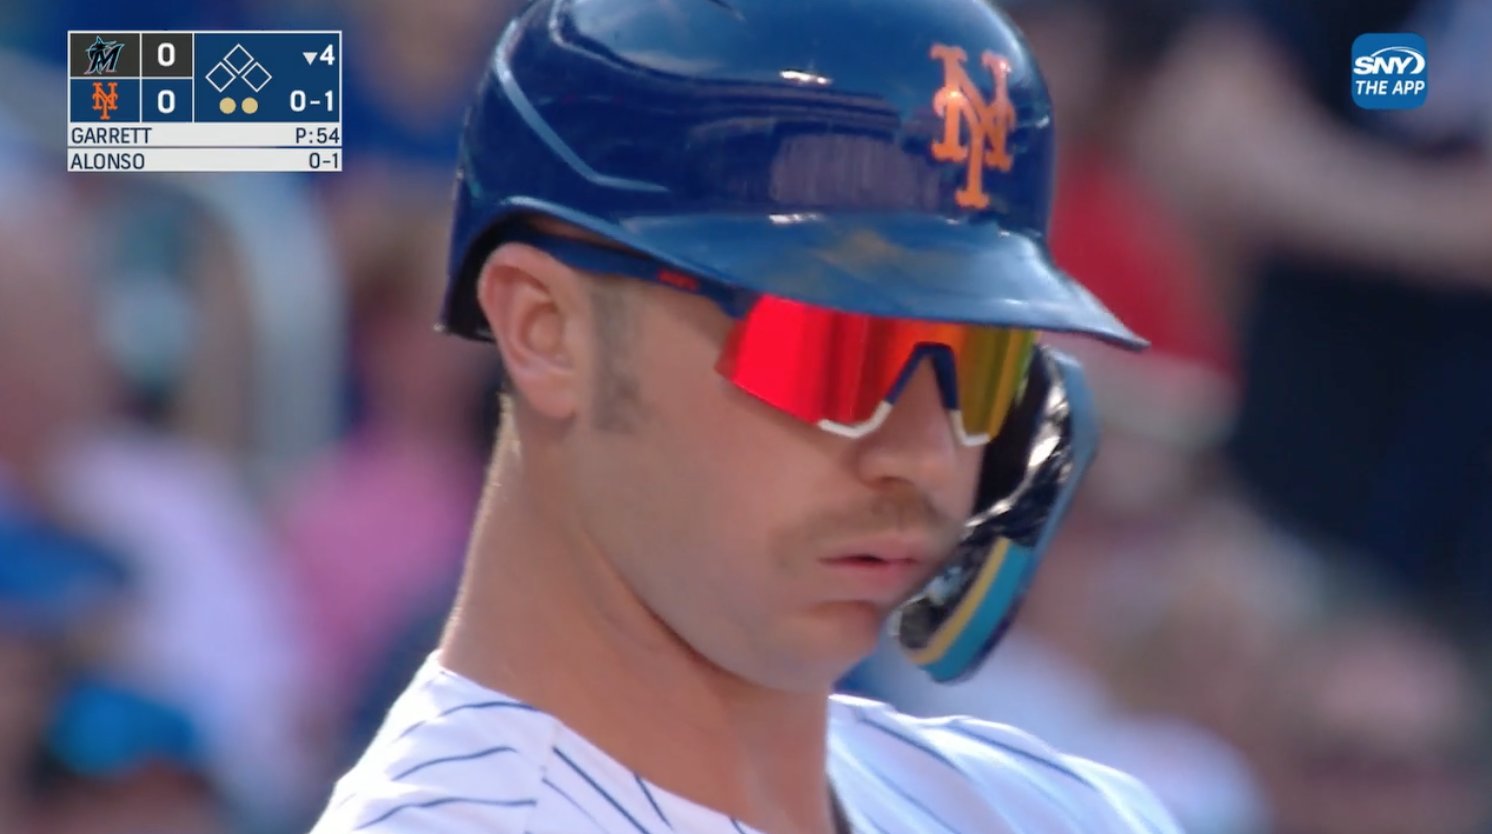 Deesha on X: Pete Alonso, sporting a mustache on Keith